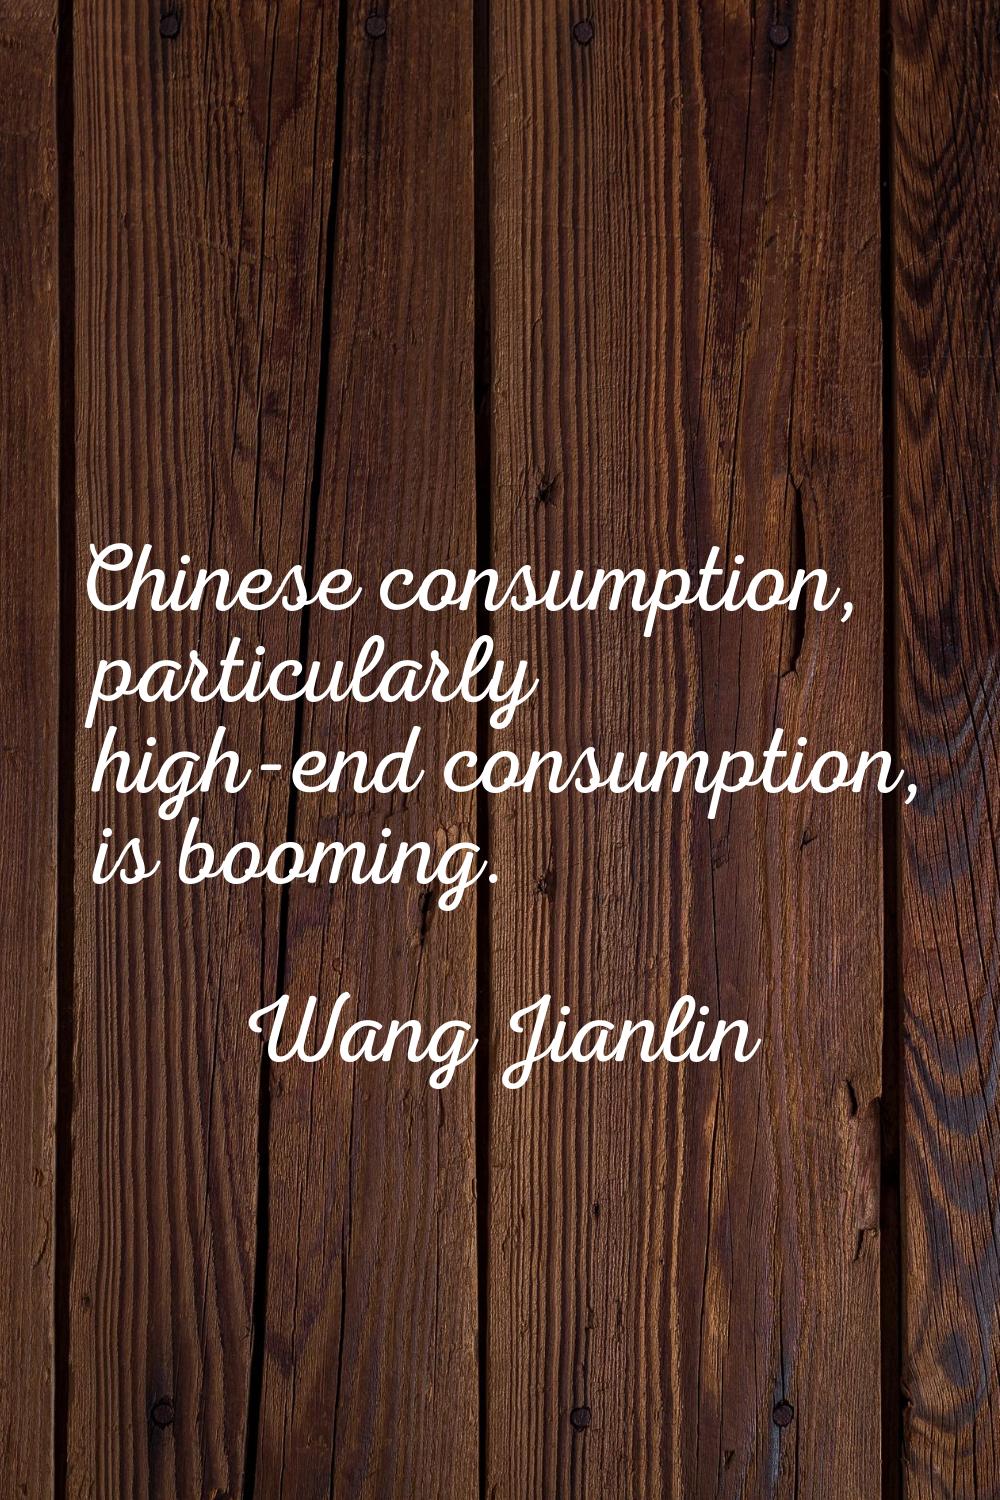 Chinese consumption, particularly high-end consumption, is booming.